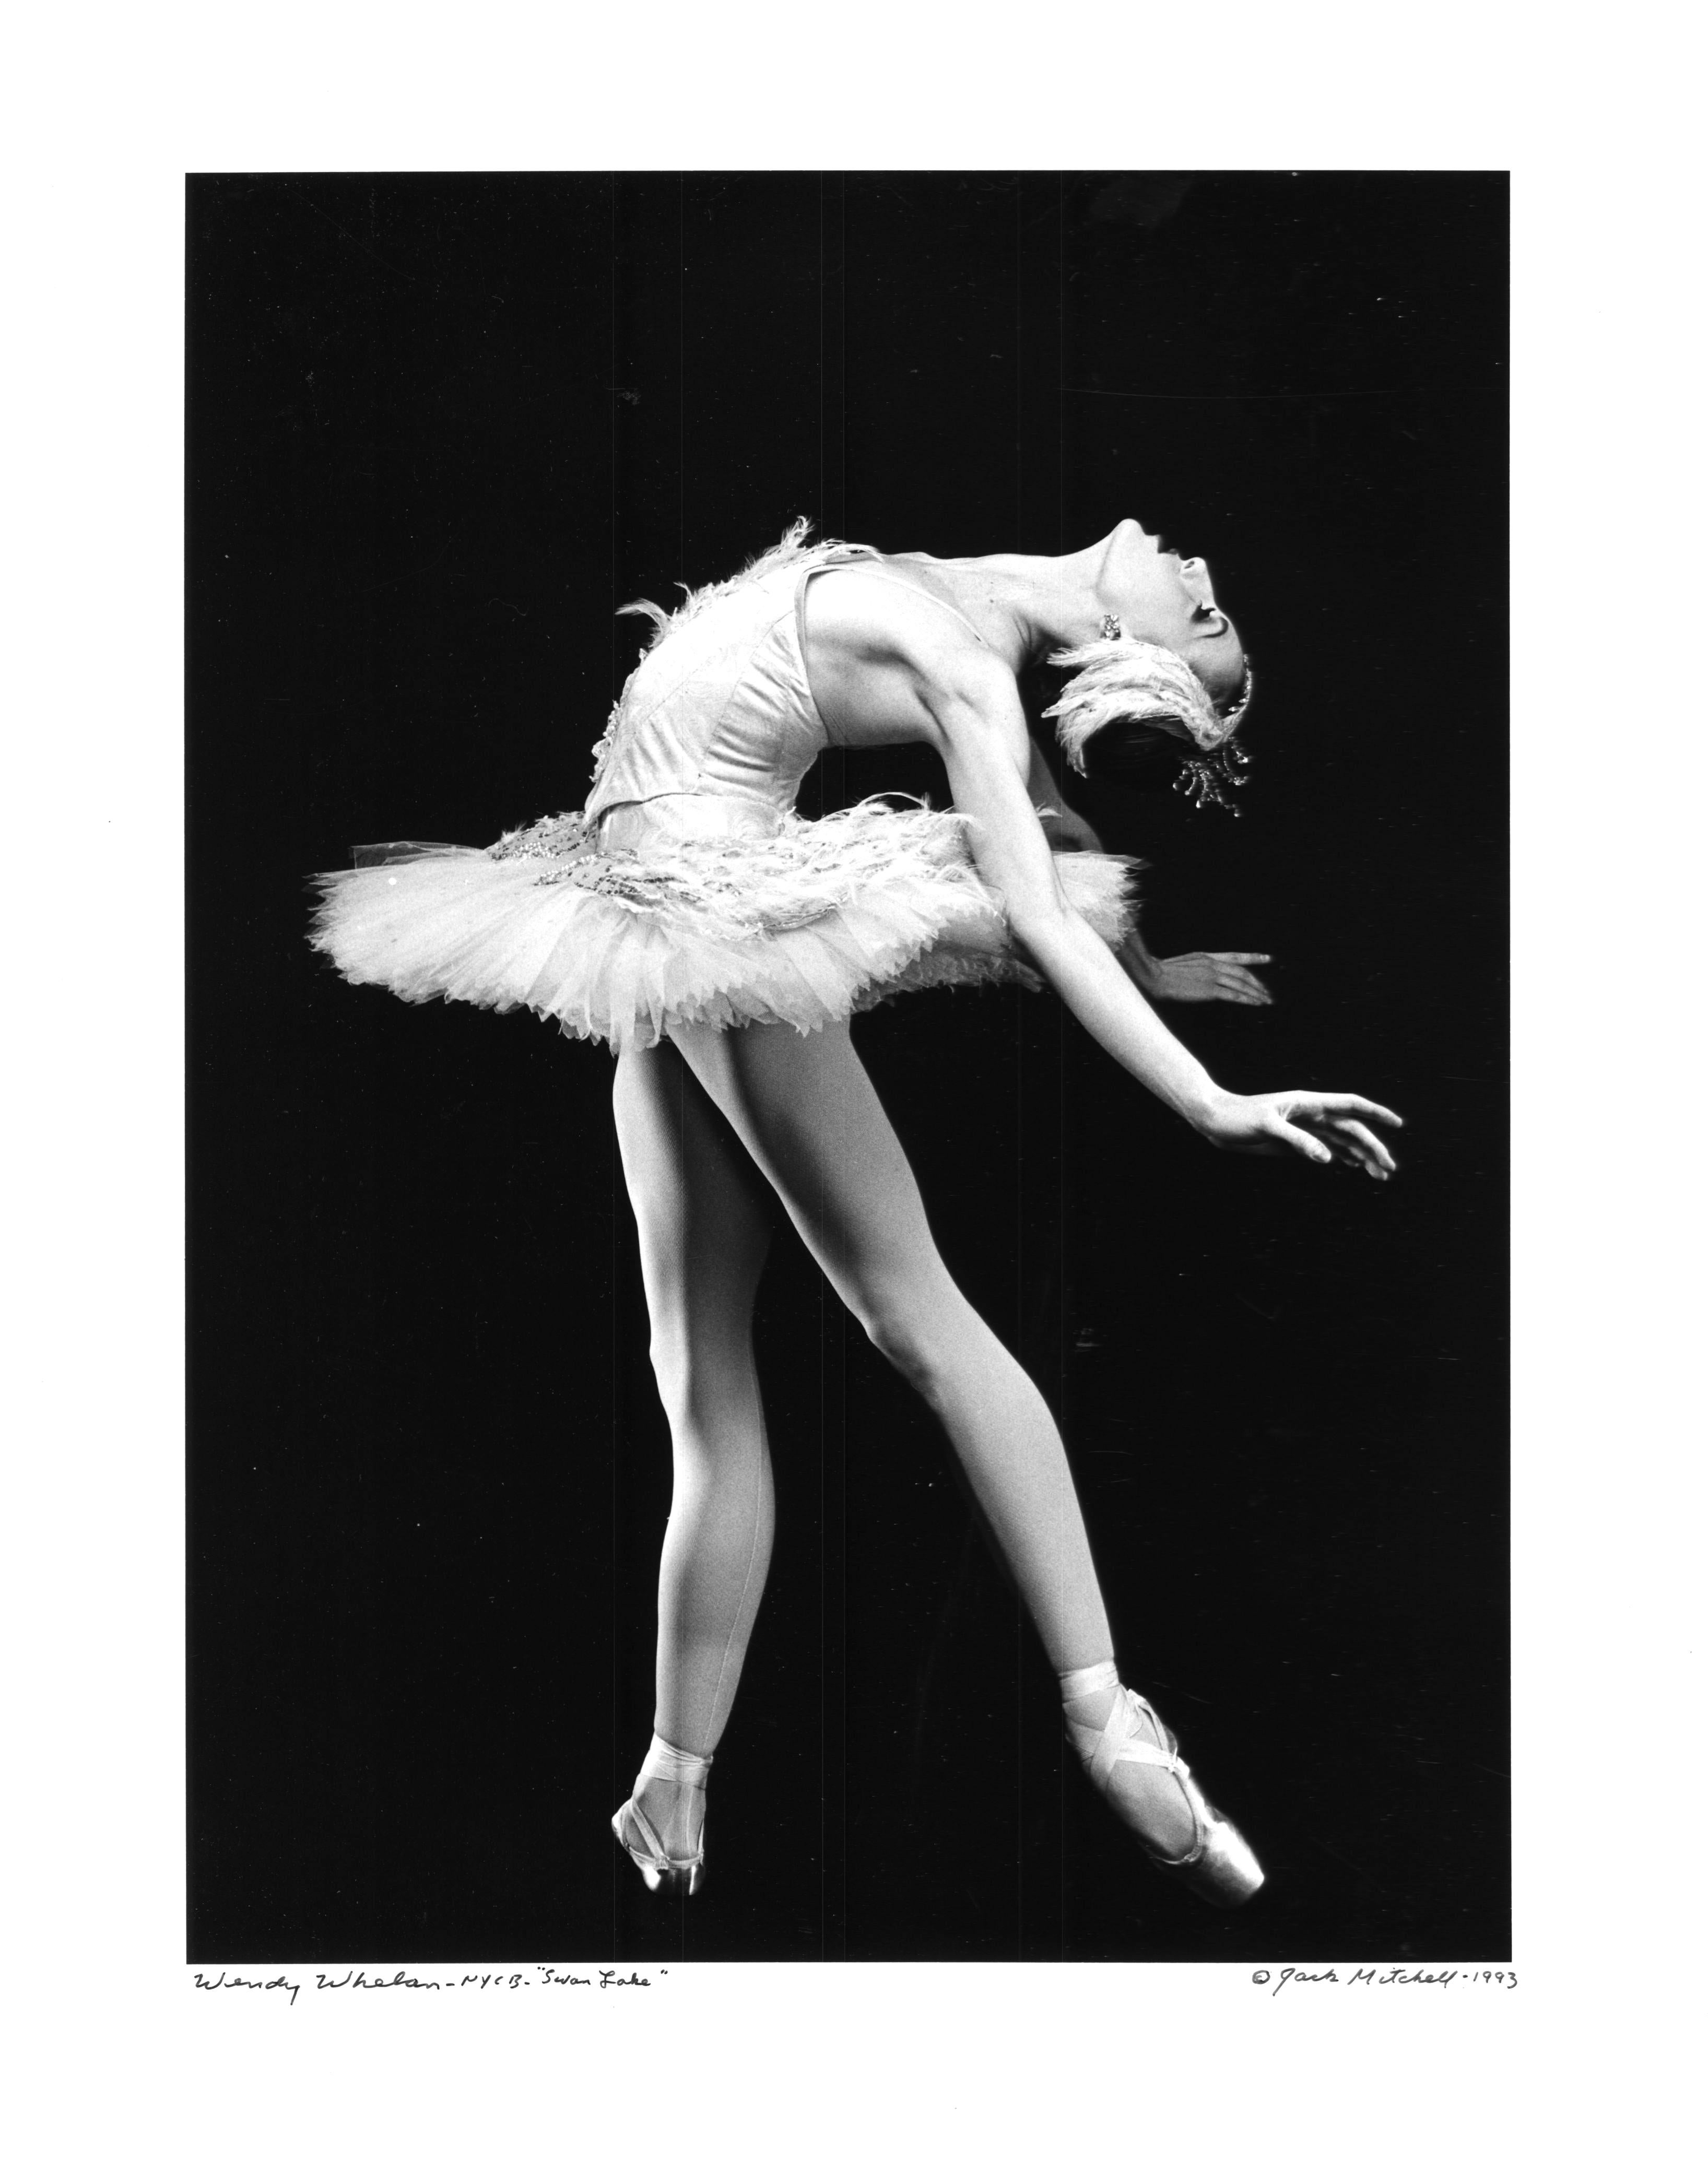 New York City Ballet Dancer Wendy Whelan in 'Swan Lake' signed by Jack Mitchell